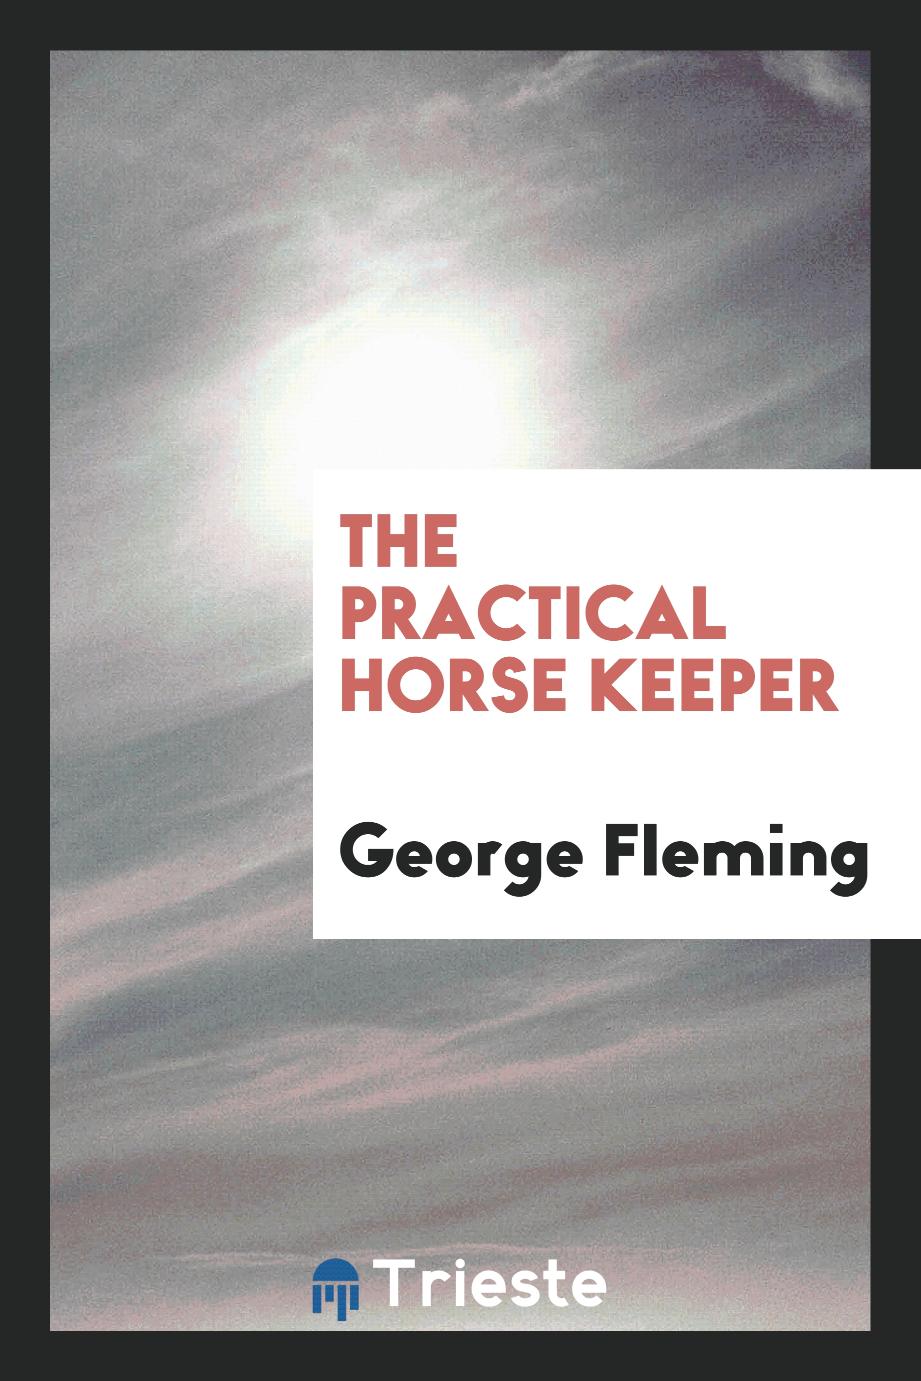 The practical horse keeper